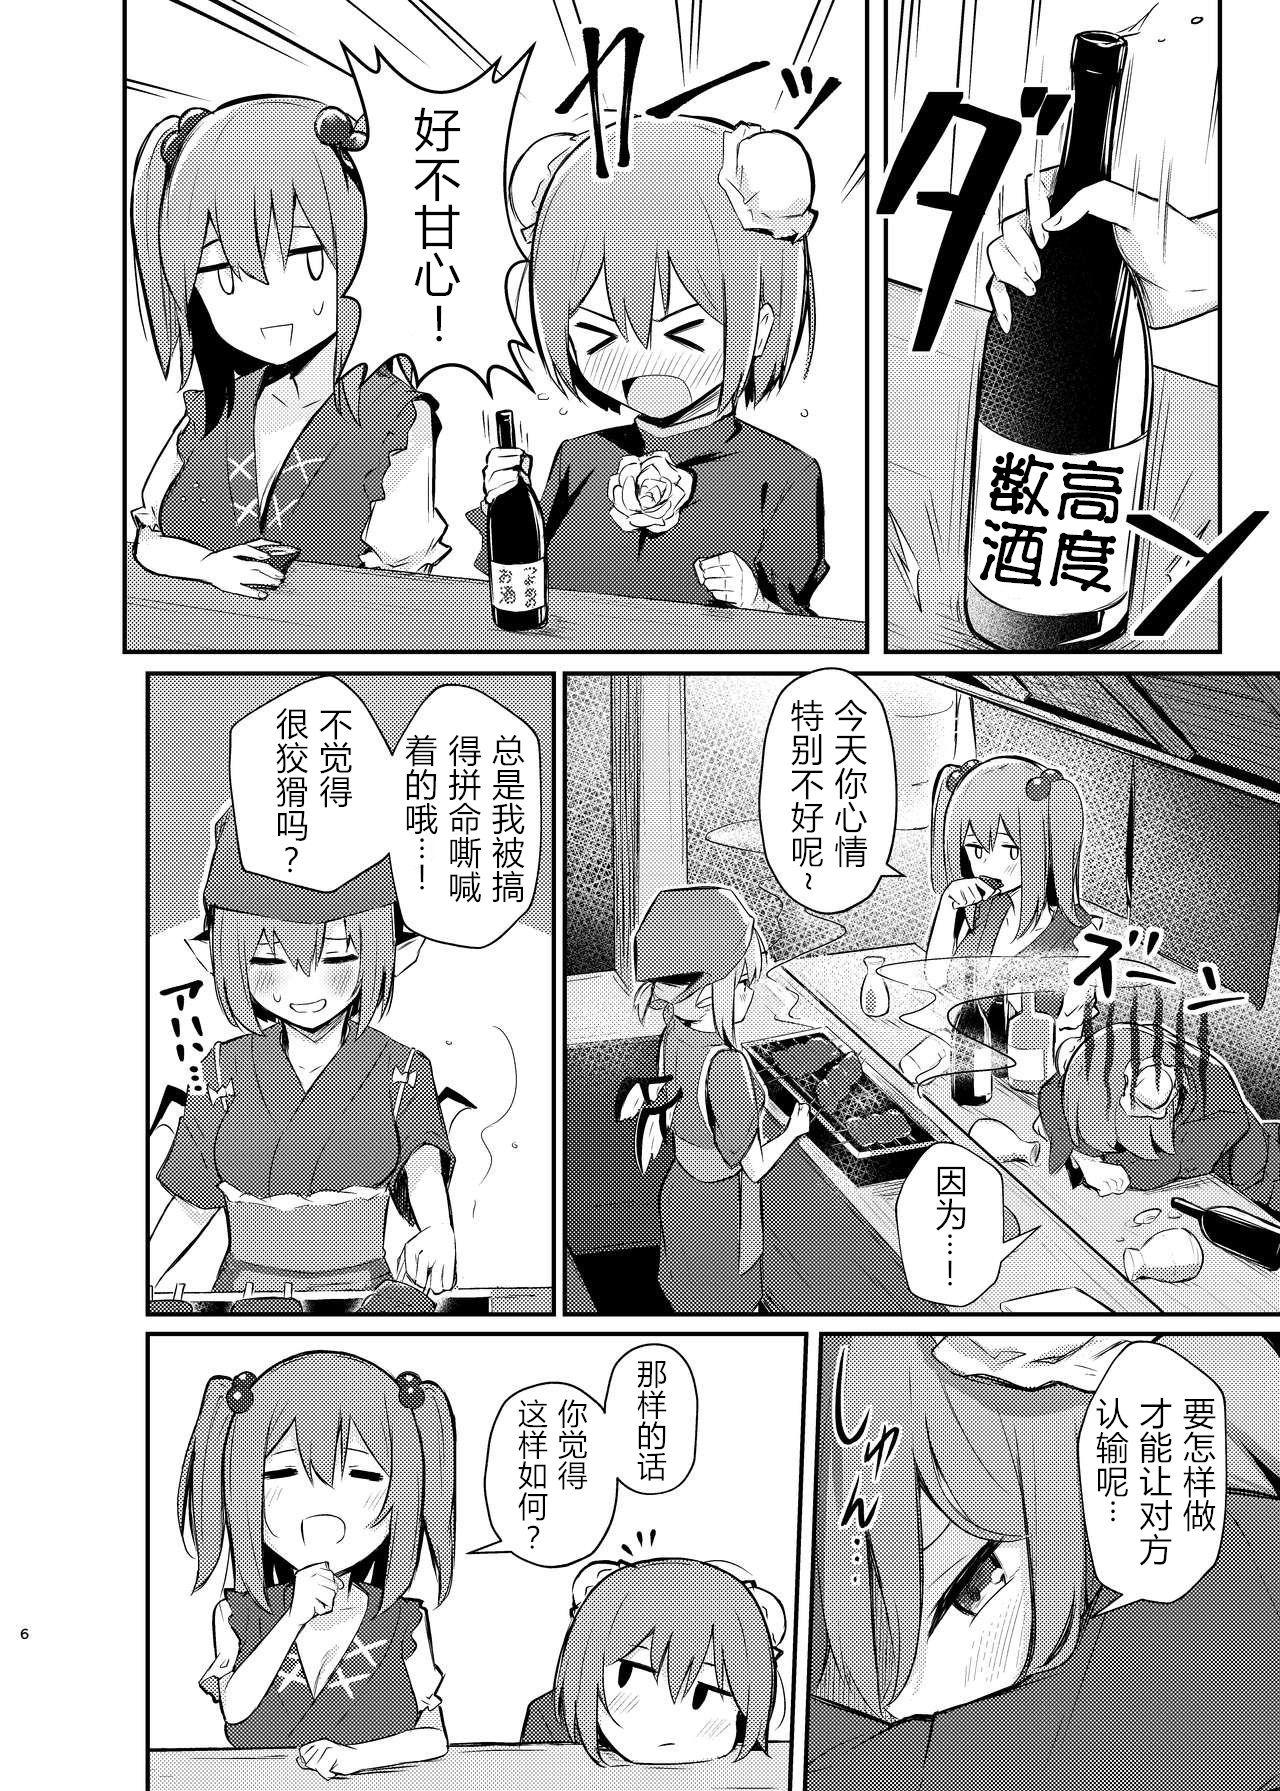 Couch Kasen-chan no Jasen Rouraku Challenge - Touhou project Girlfriends - Page 5